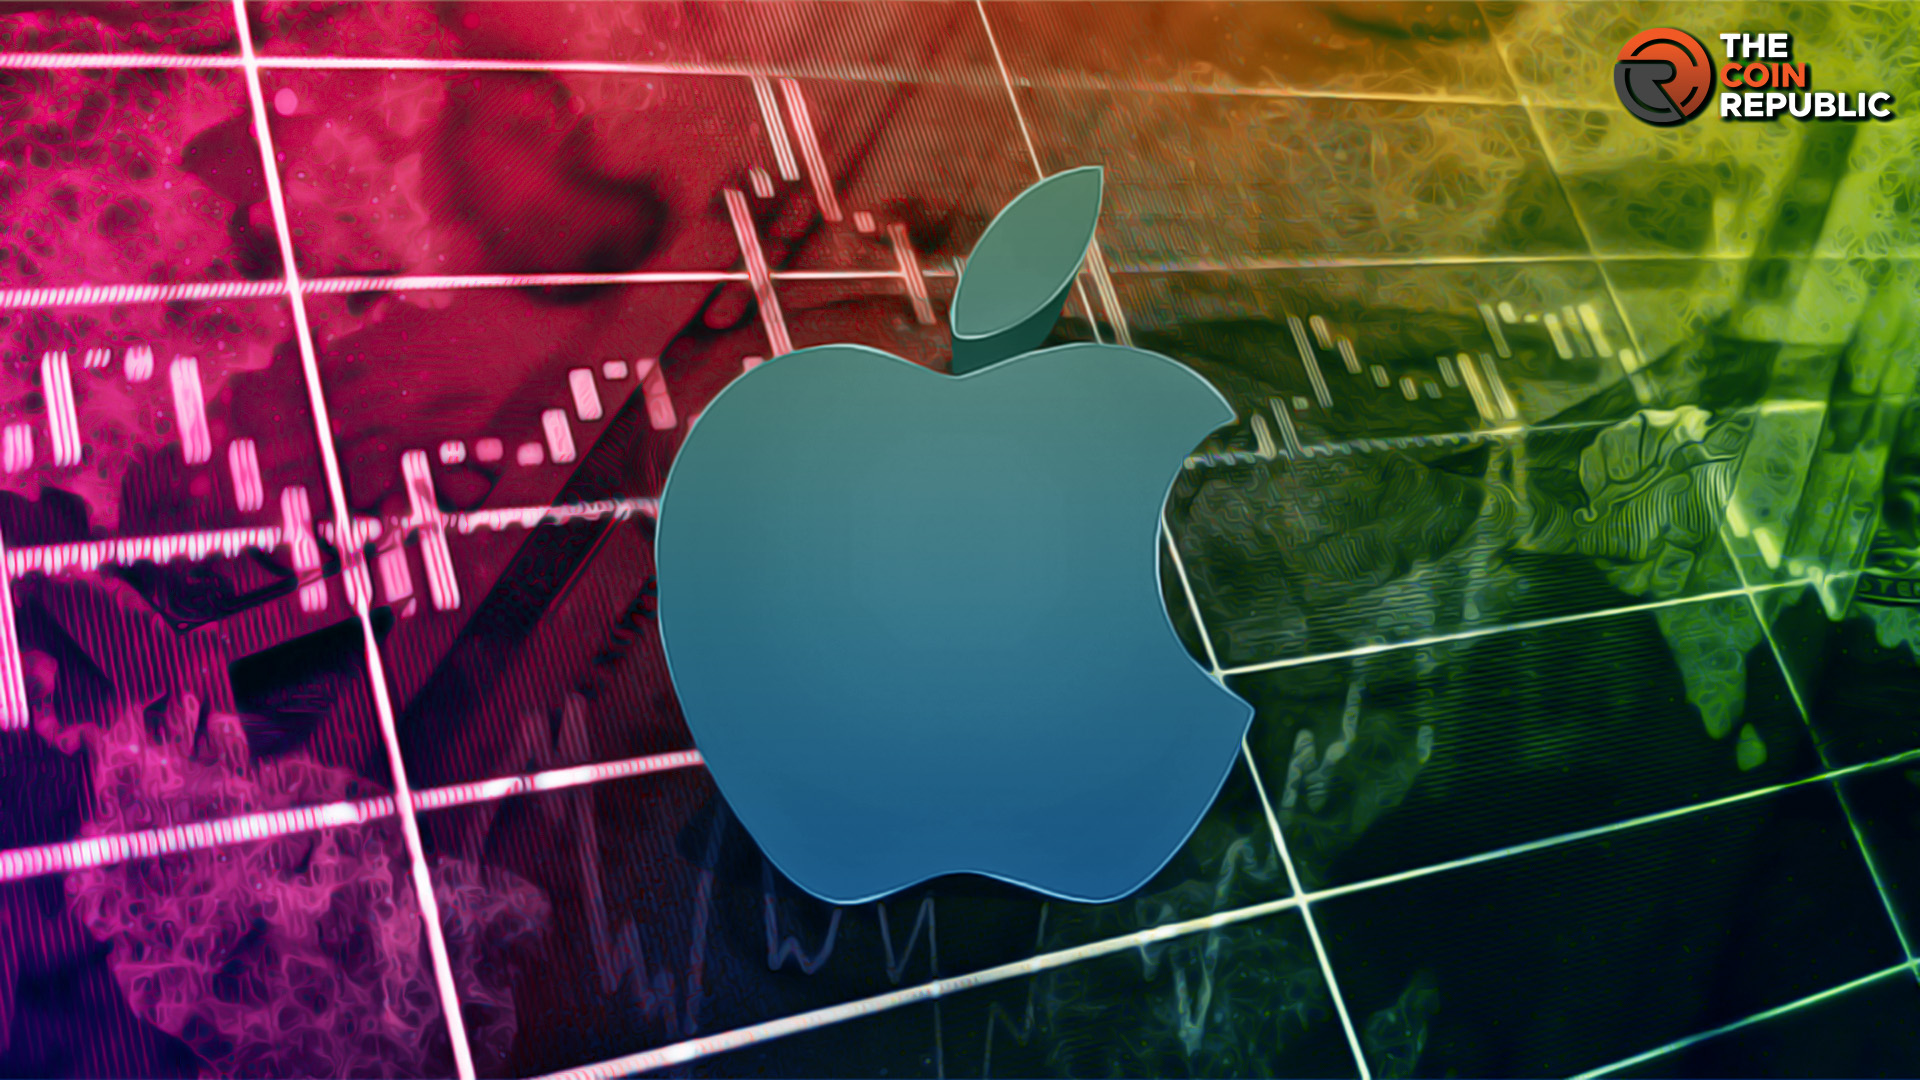 AAPL Stock: Can (NASDAQ: AAPL) Price Reach $240 and More?